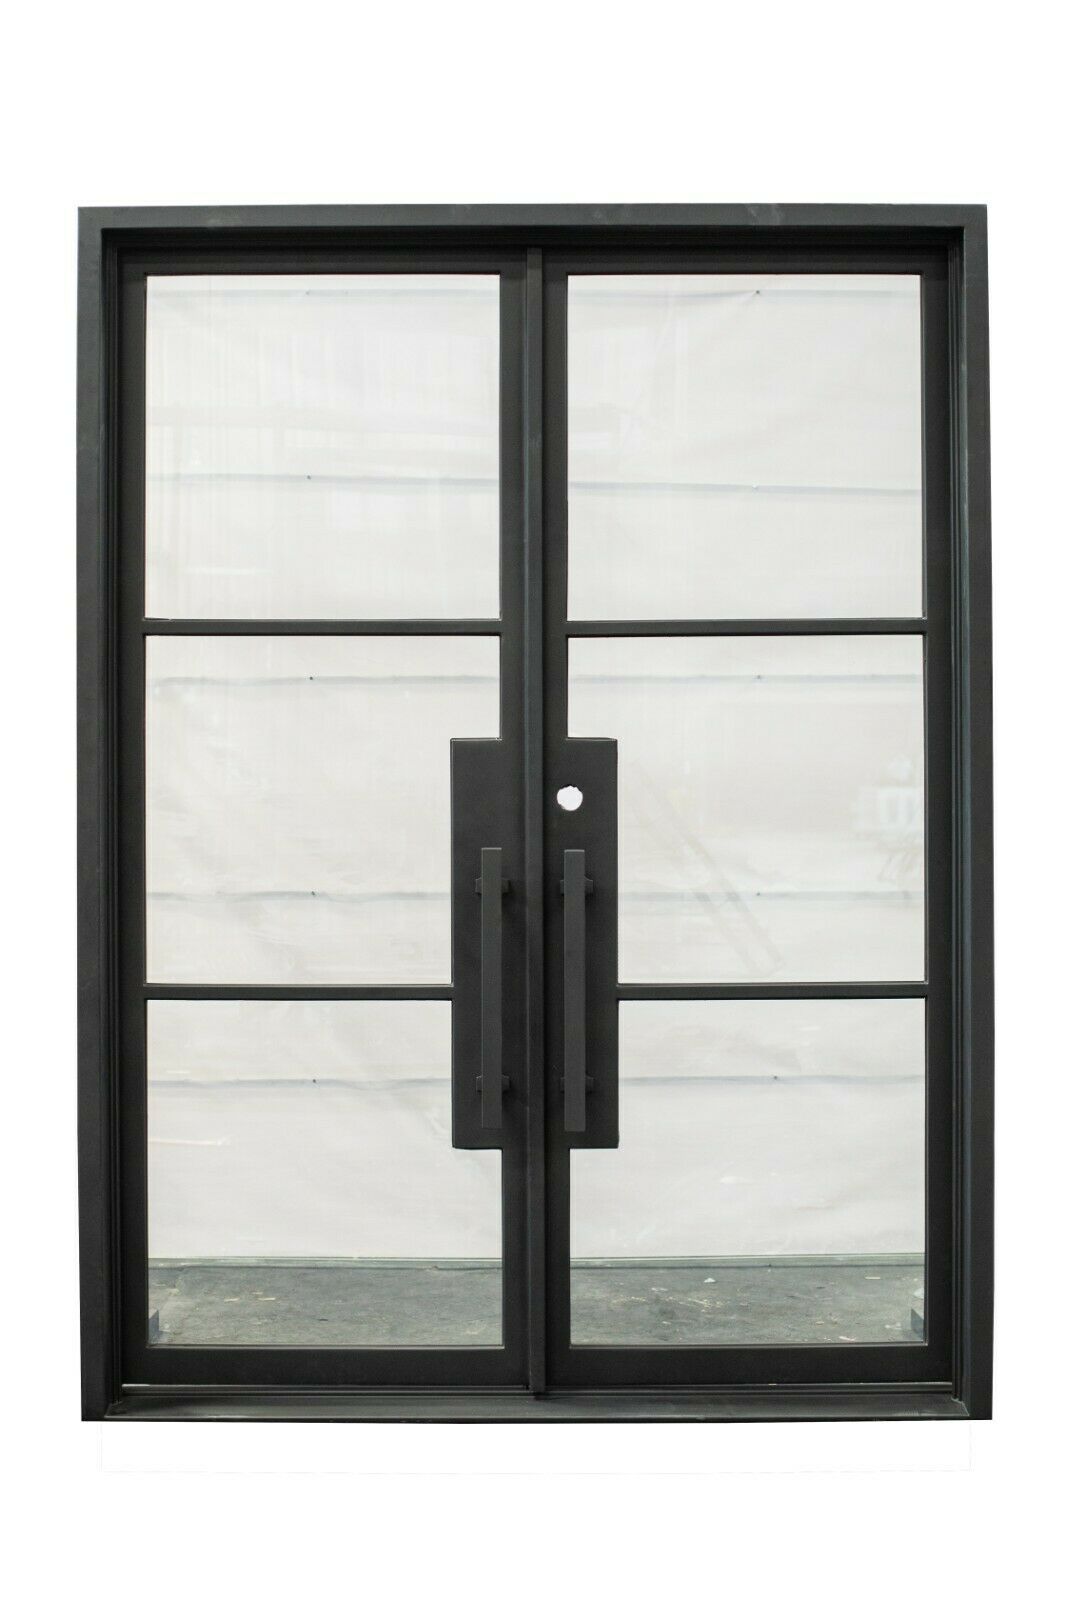 Hico Model Double Front Entry Iron Door With Tempered Low E Clear Glass Matt Black Finish